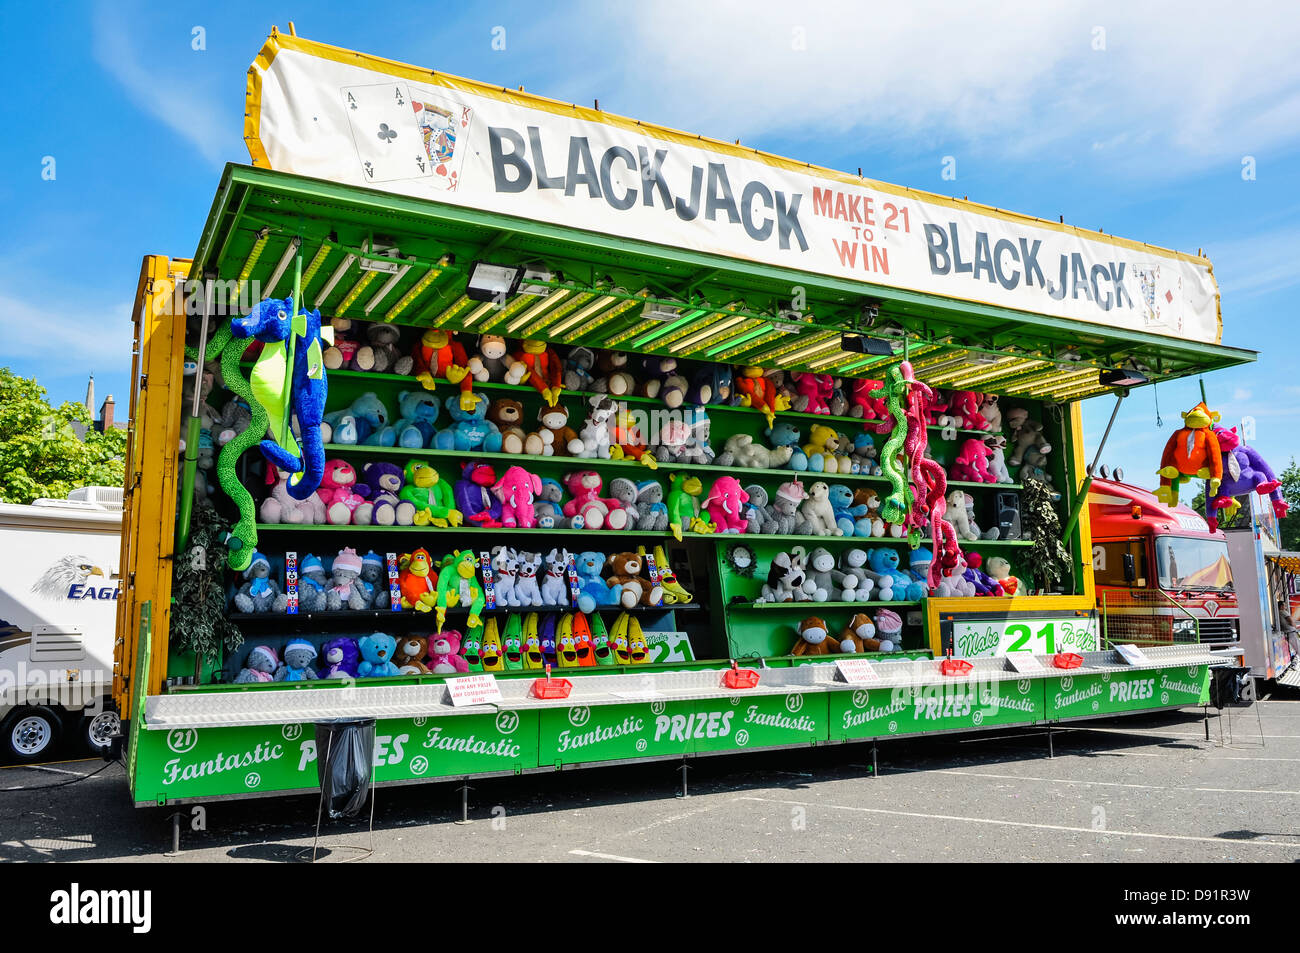 'Blackjack' fairground stall offering cuddly toys as prizes for having tickets totalling 21. Stock Photo